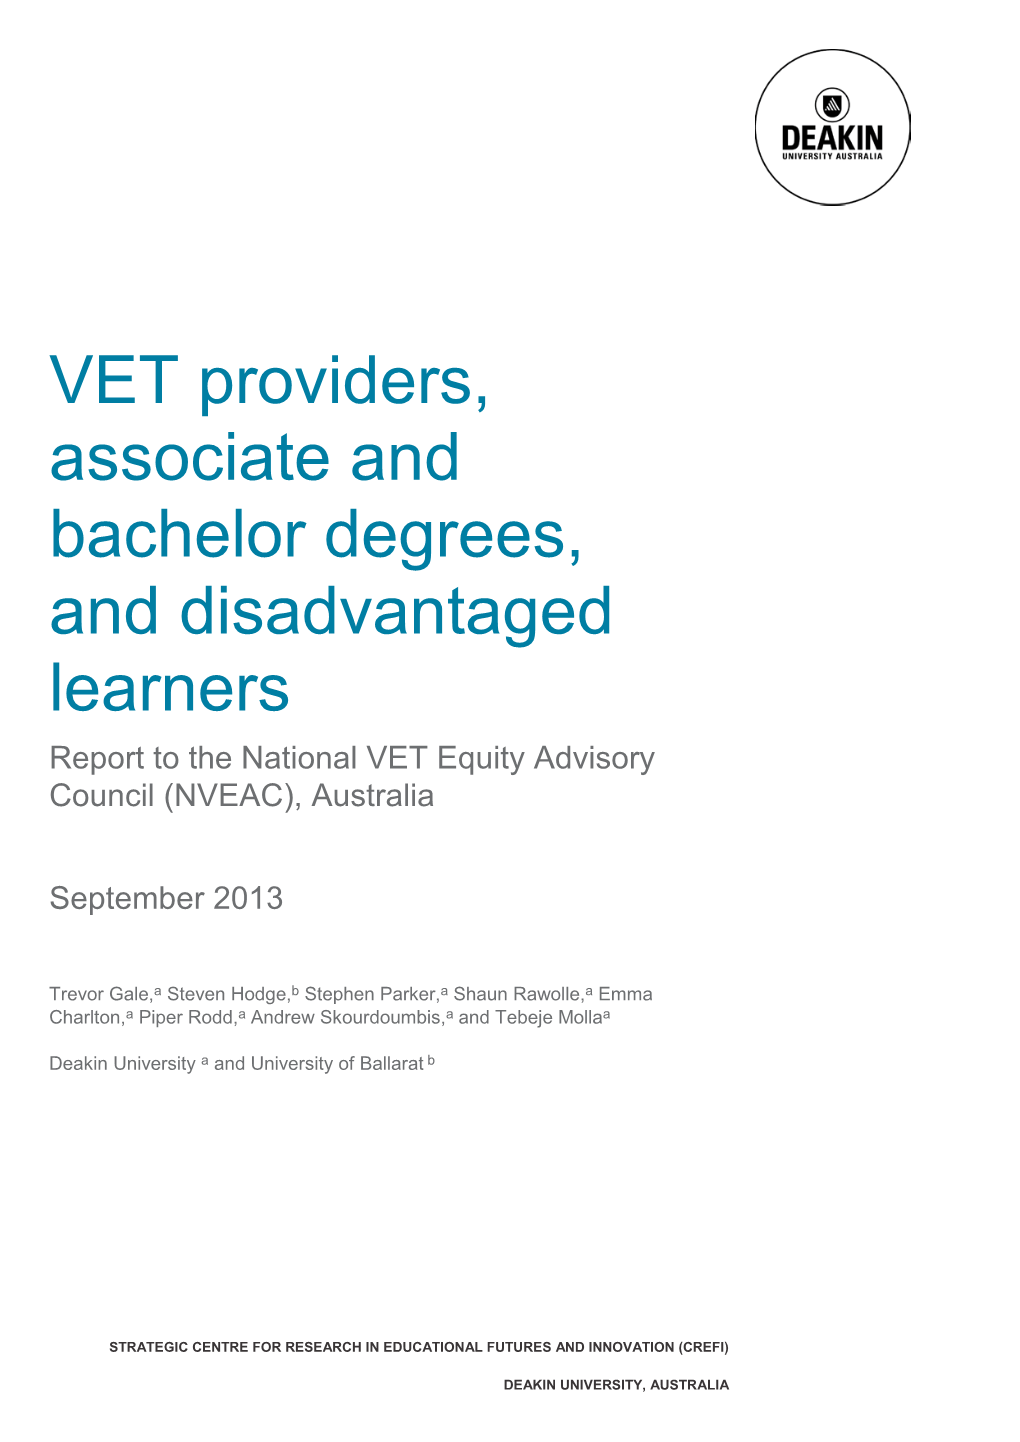 VET Providers, Associate and Bachelor Degrees, and Disadvantaged Learners Report to the National VET Equity Advisory Council (NVEAC), Australia